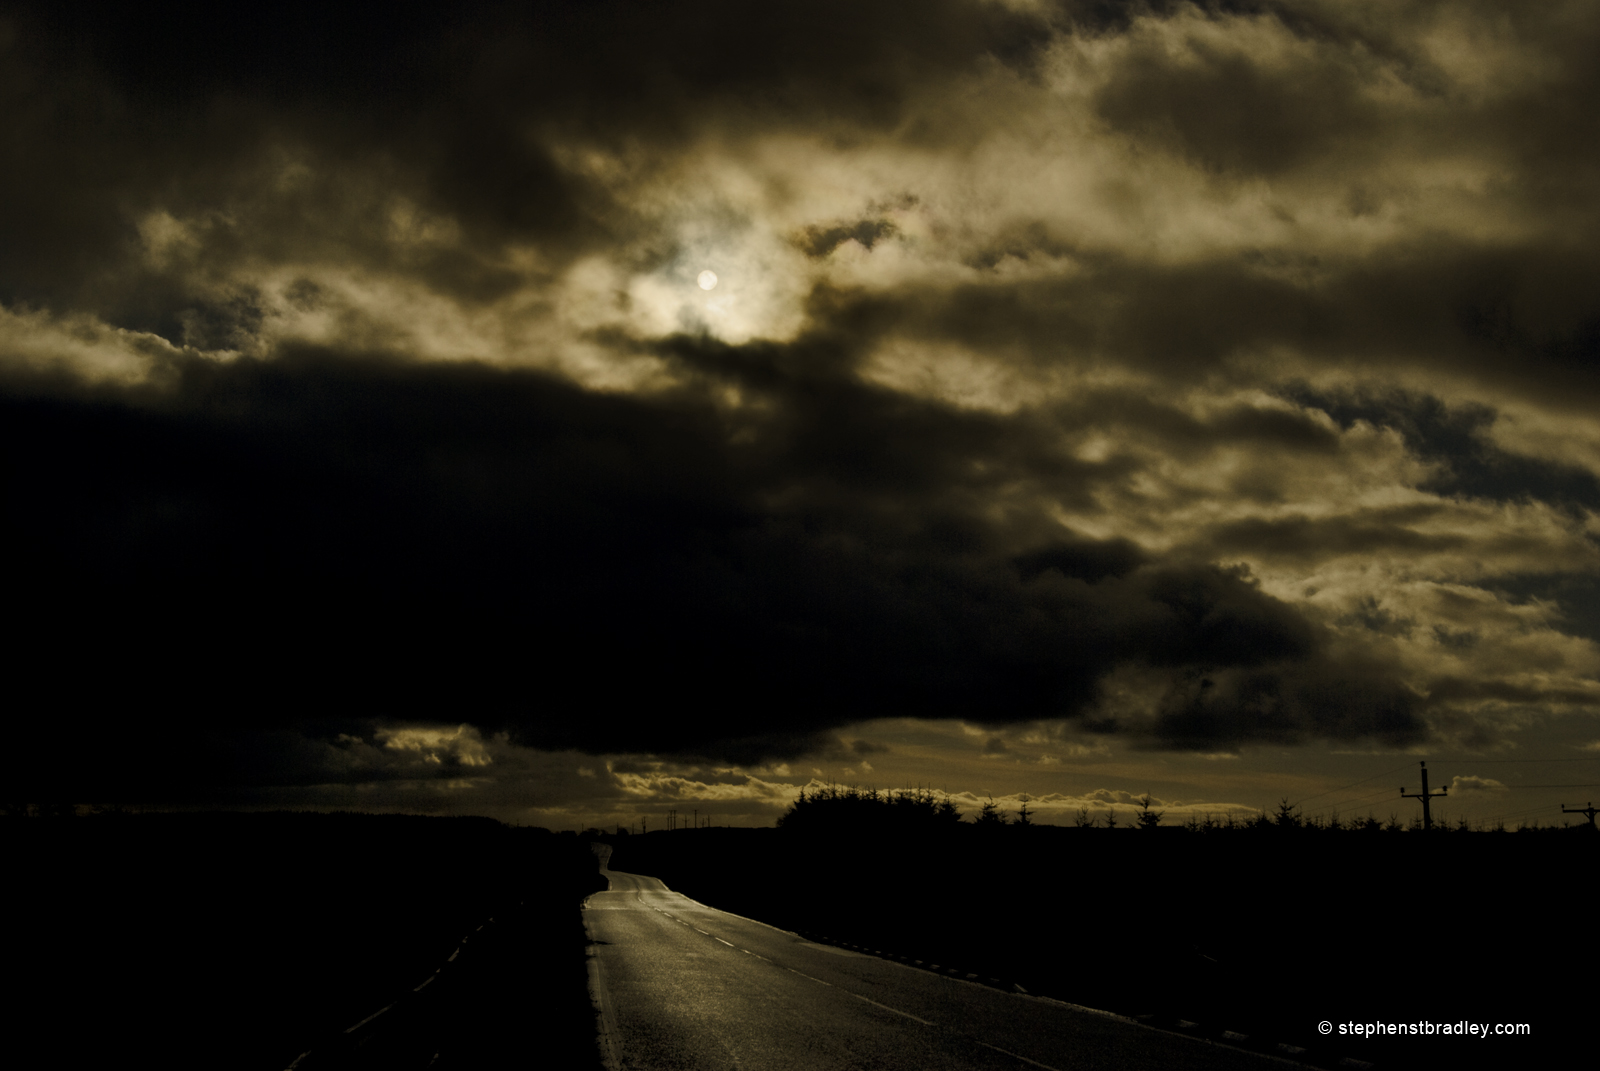 Landscape photograph of sun over Dundrod Road, Northern Ireland image 4746.